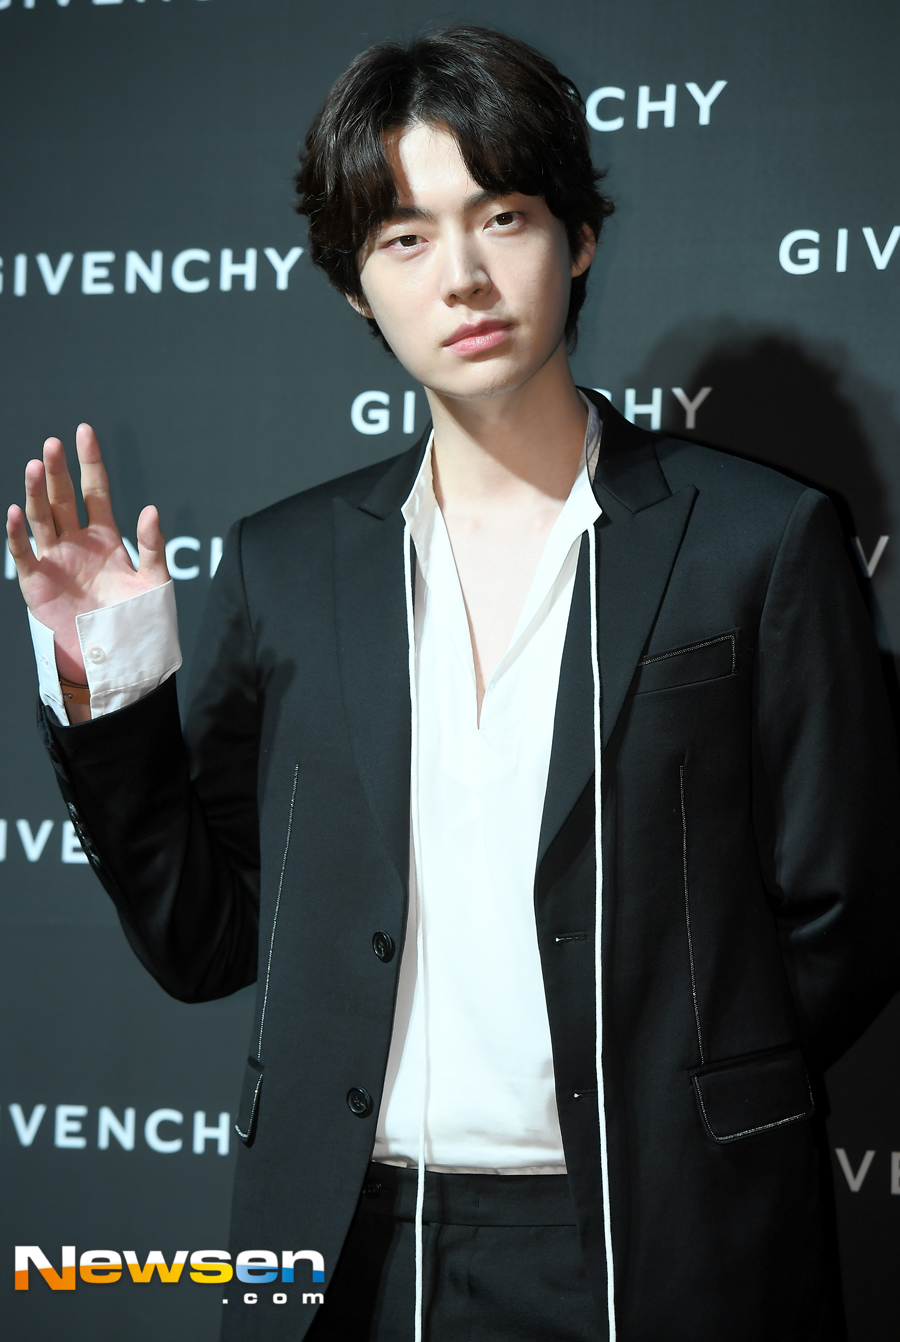 The Local City Photo Call Event was held at Burlesque in Cheongdam, Gangnam-gu, Seoul on the afternoon of July 5.On that day, Ahn Jae-hyun attended.Jung Yu-jin